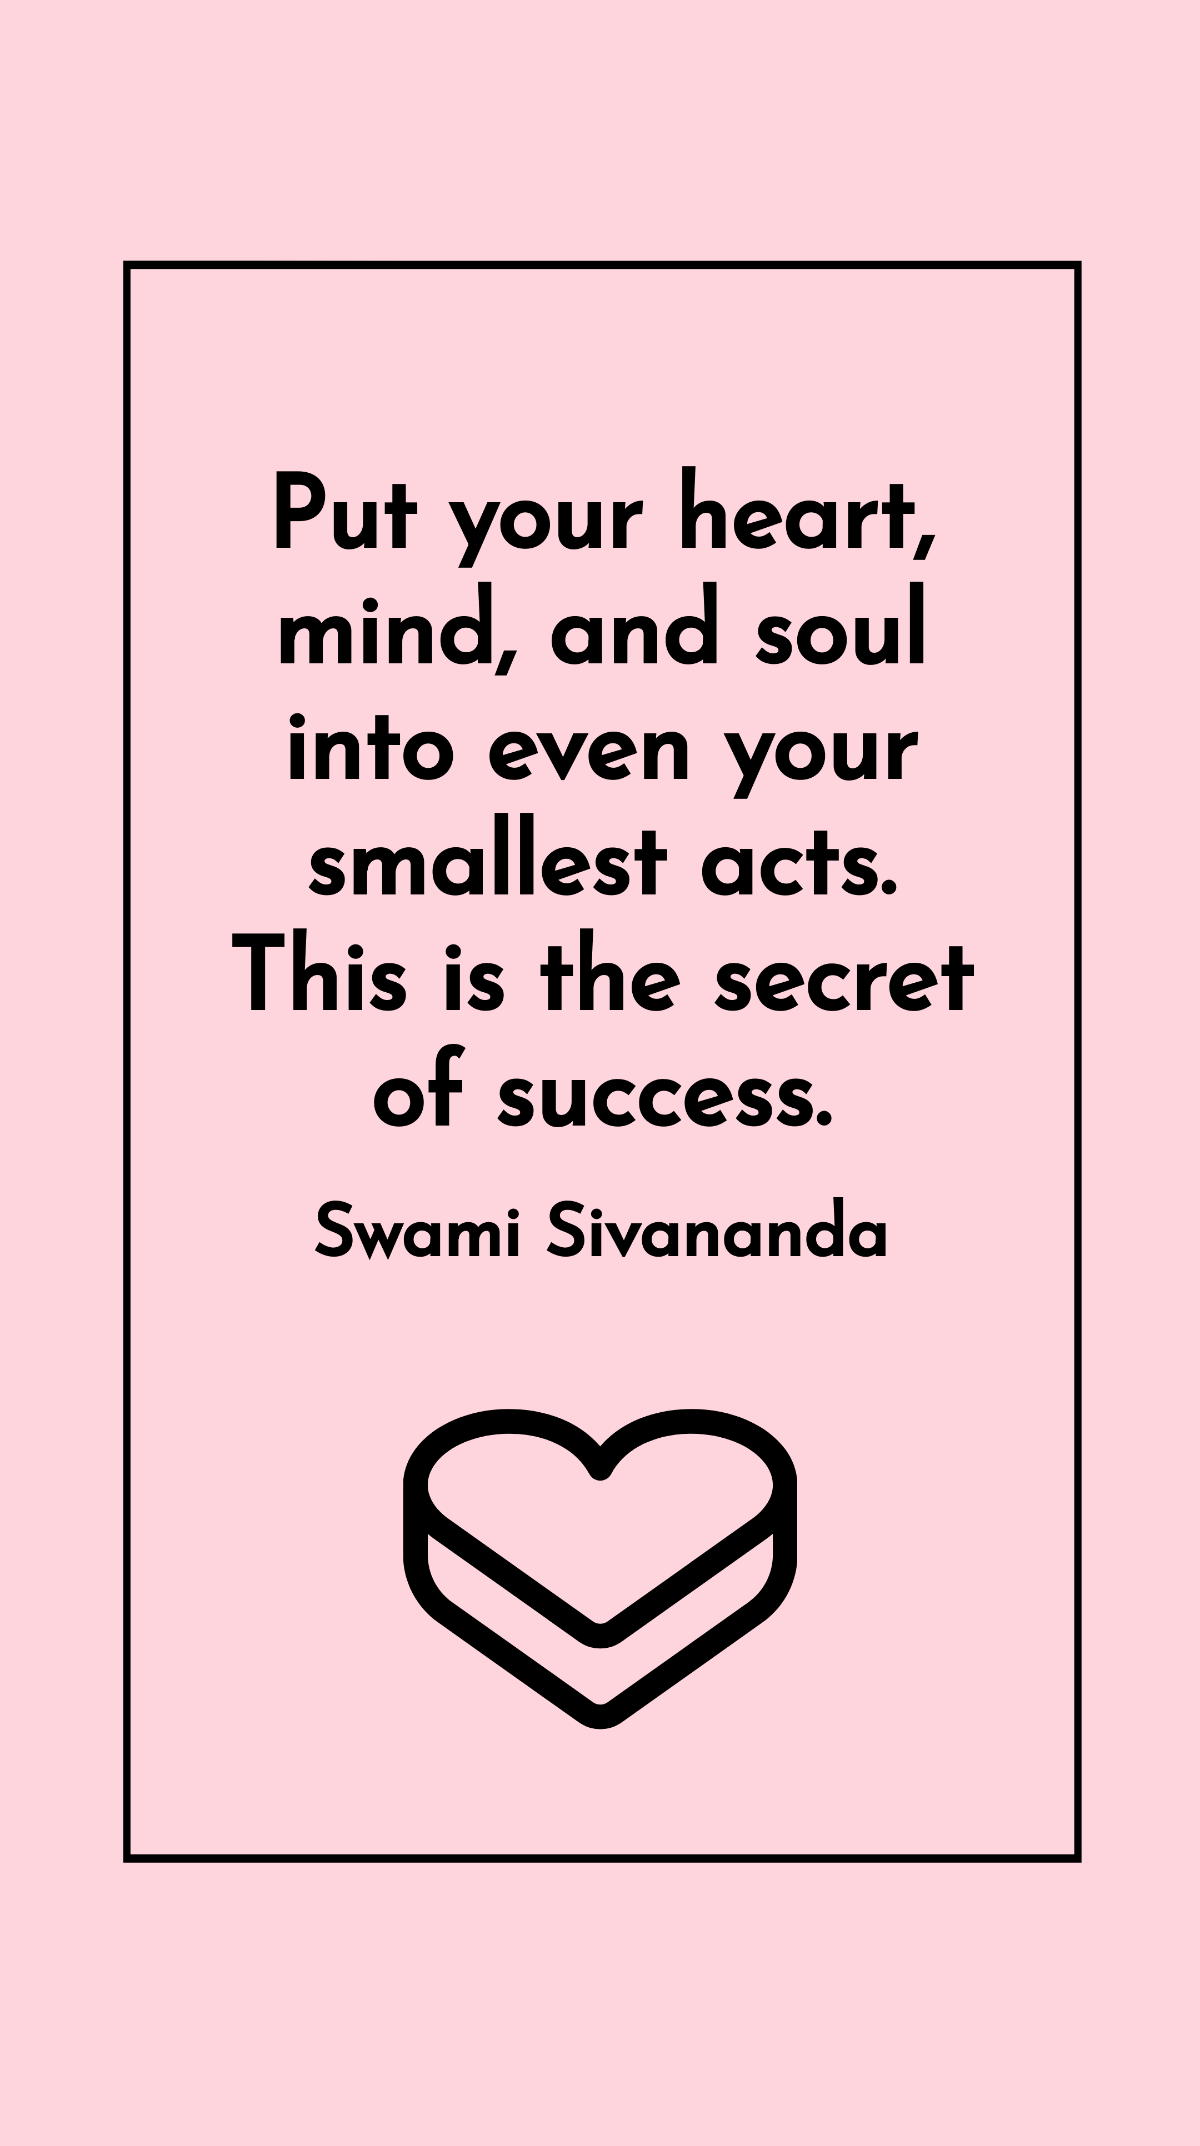 Swami Sivananda - Put your heart, mind, and soul into even your smallest acts. This is the secret of success. Template